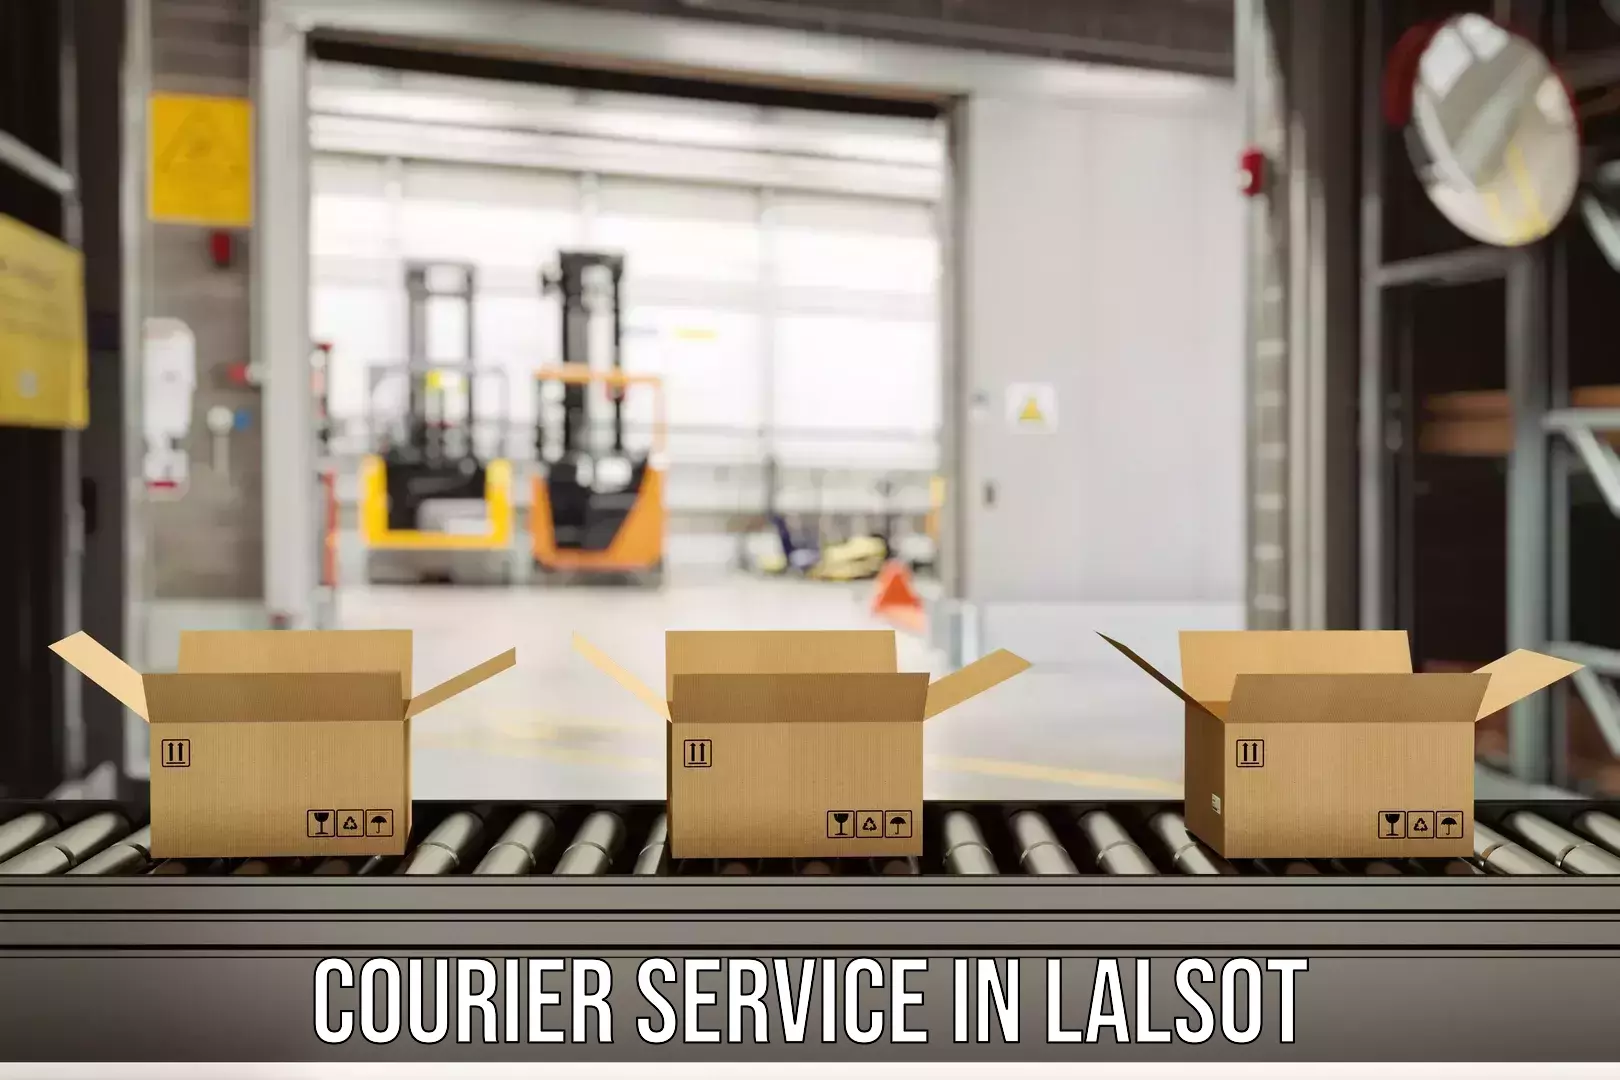 Personal courier services in Lalsot